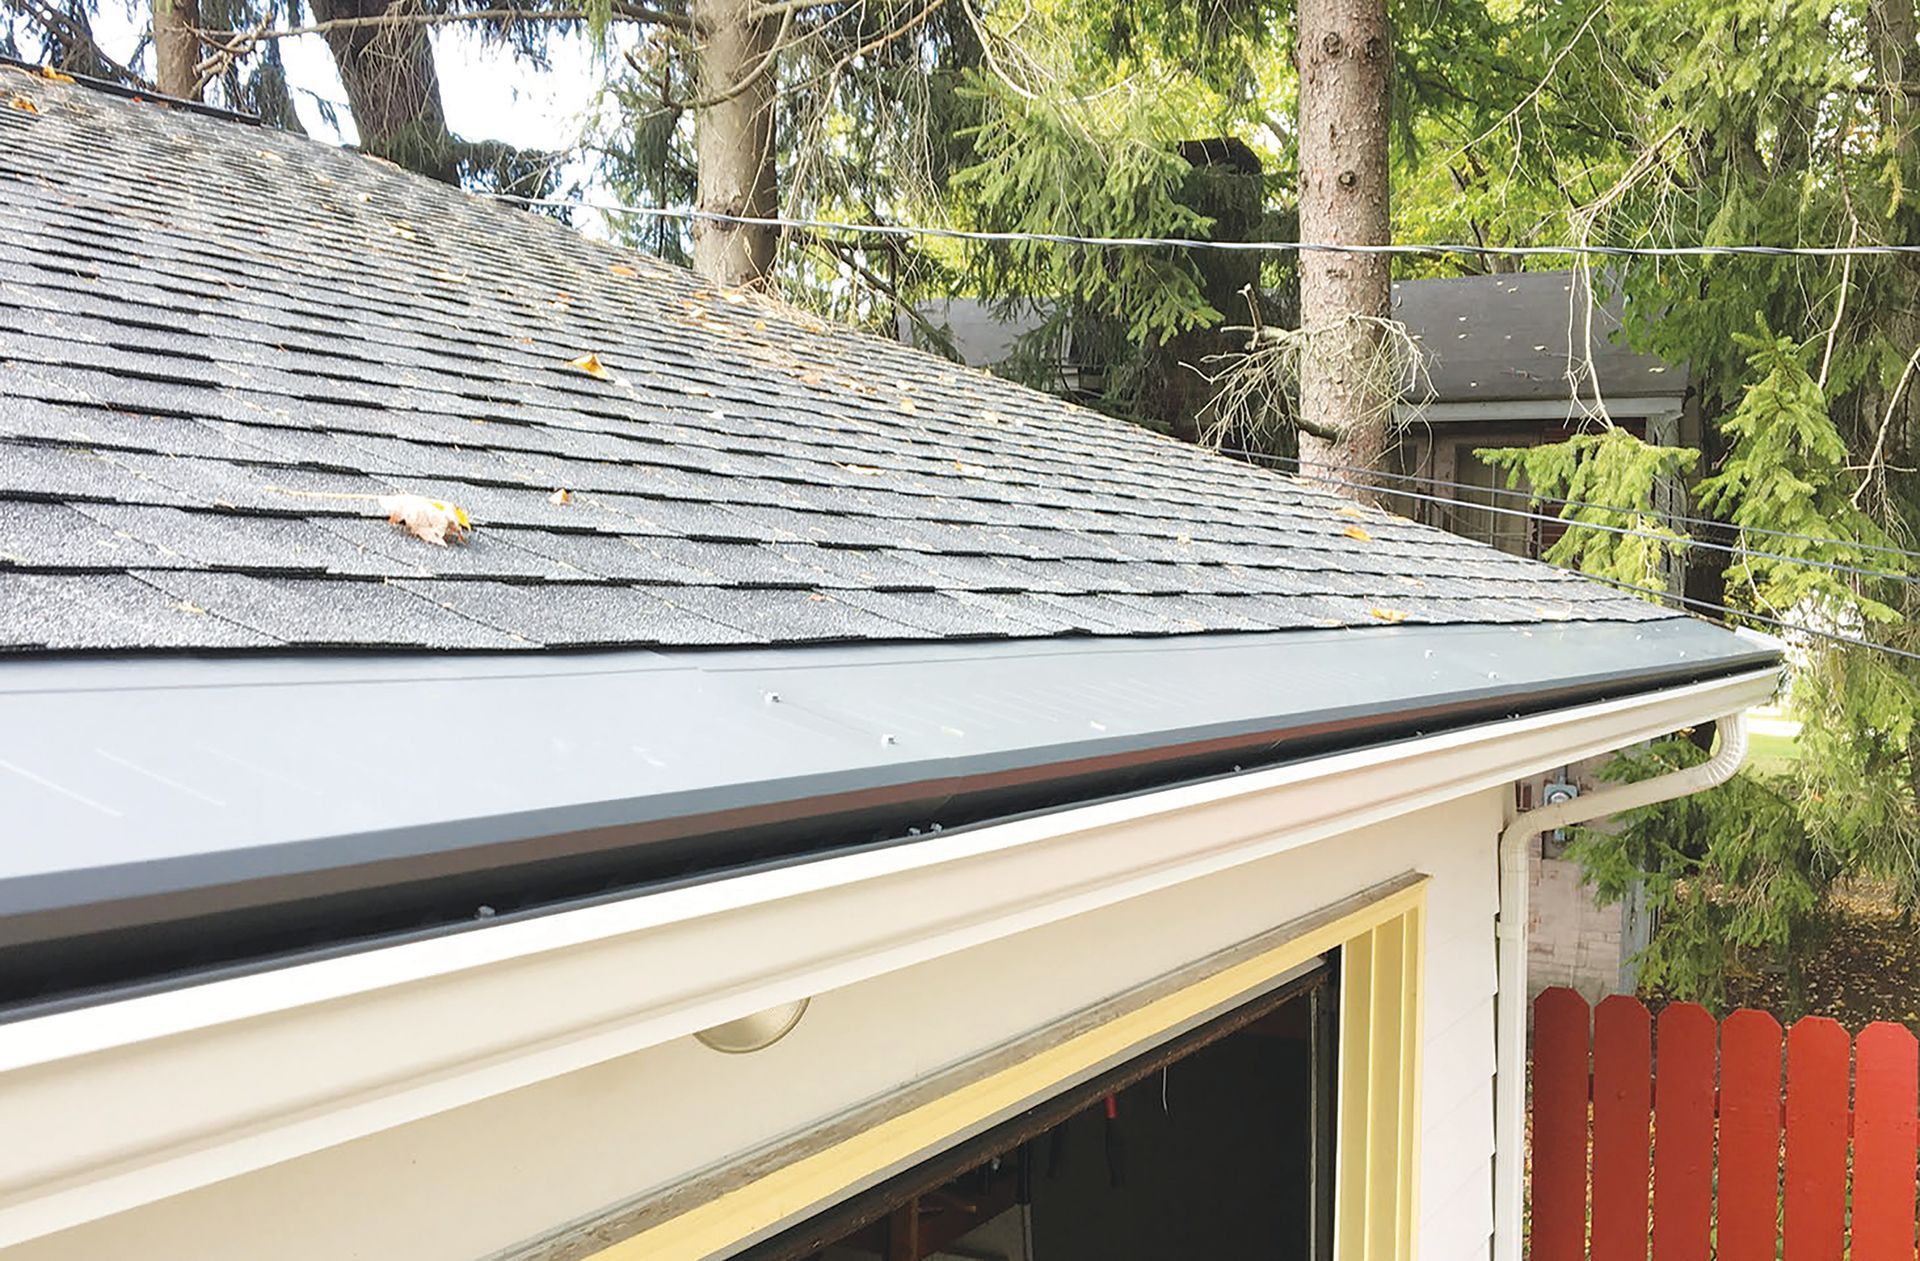 The smooth, solid, strong Gutter Topper from The Gutter Cover Company